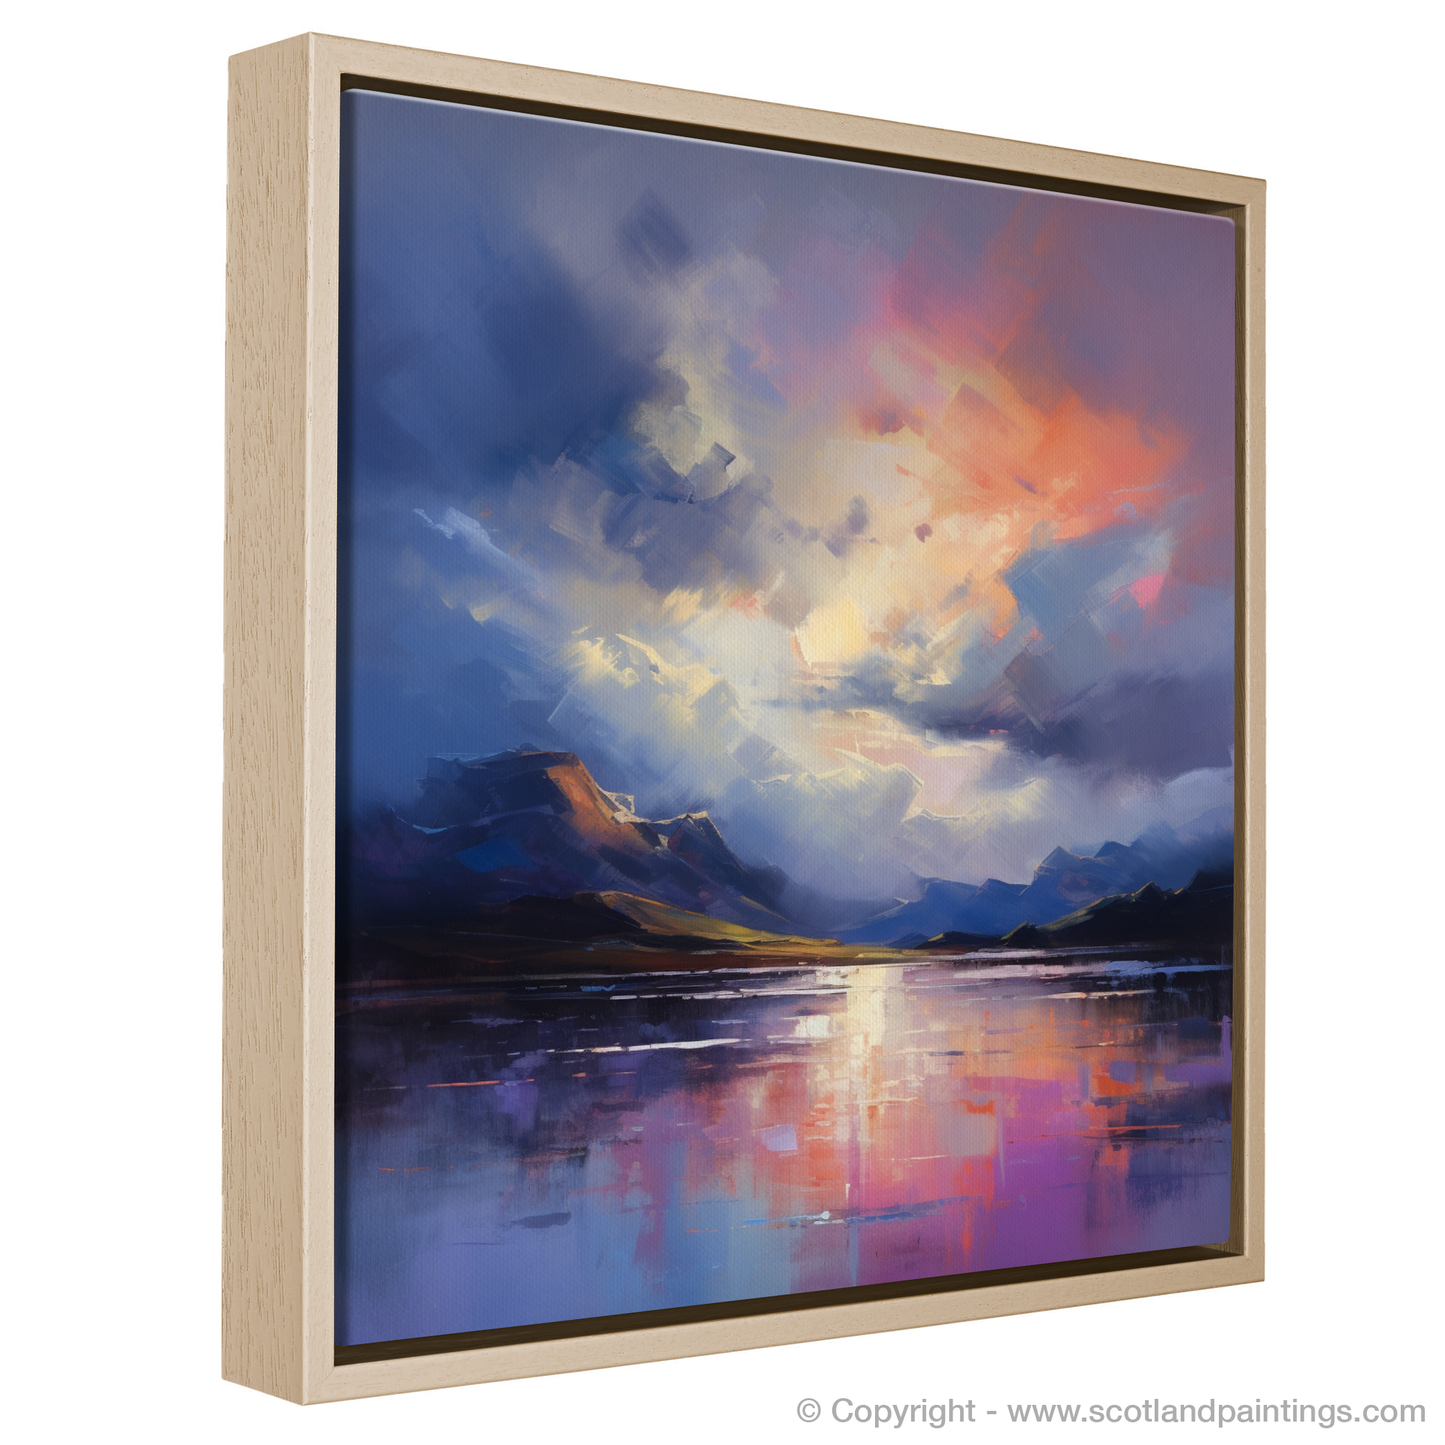 Painting and Art Print of Storm clouds above Loch Lomond entitled "Storm's Embrace over Loch Lomond".